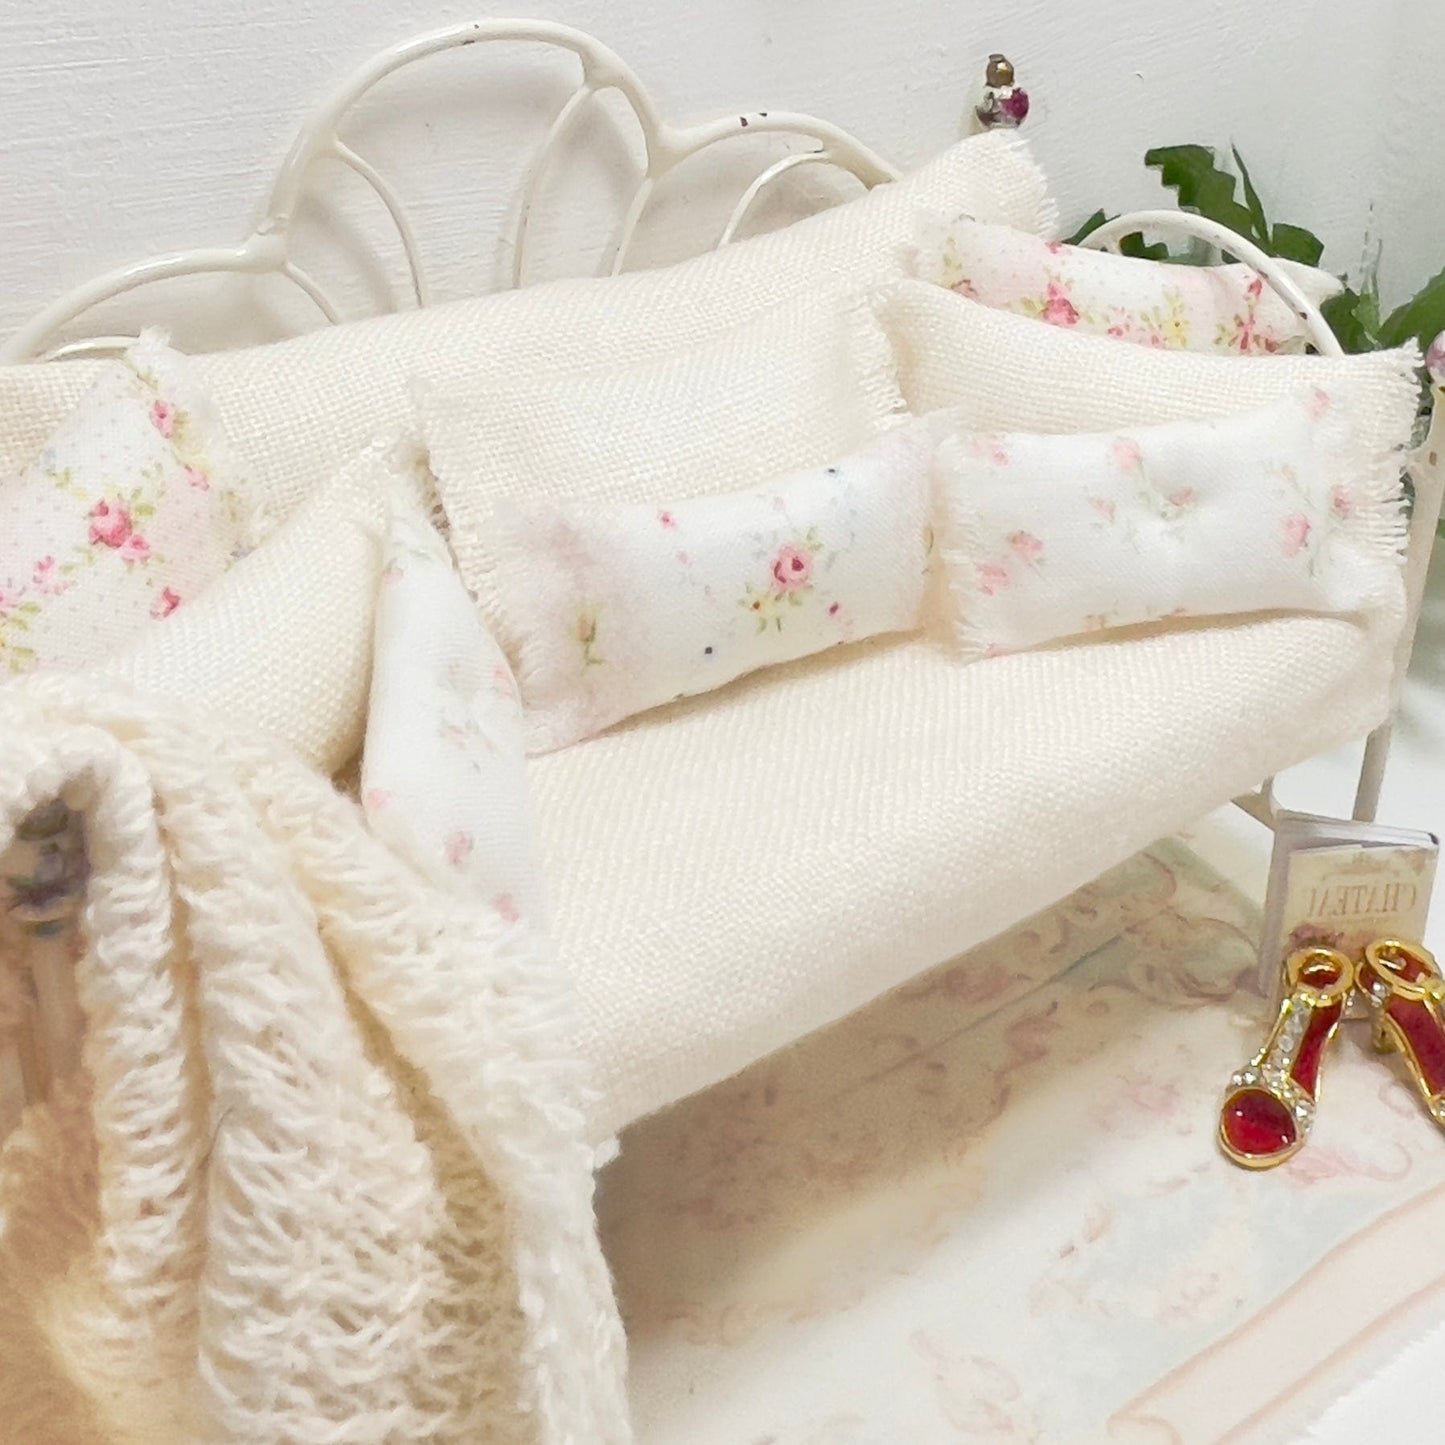 Chantallena Doll House Day Bed | Tea Dyed Linen wuth Petite Pink Roses 1:12 Scale Dollhouse Set | Floral Vintage Cream4